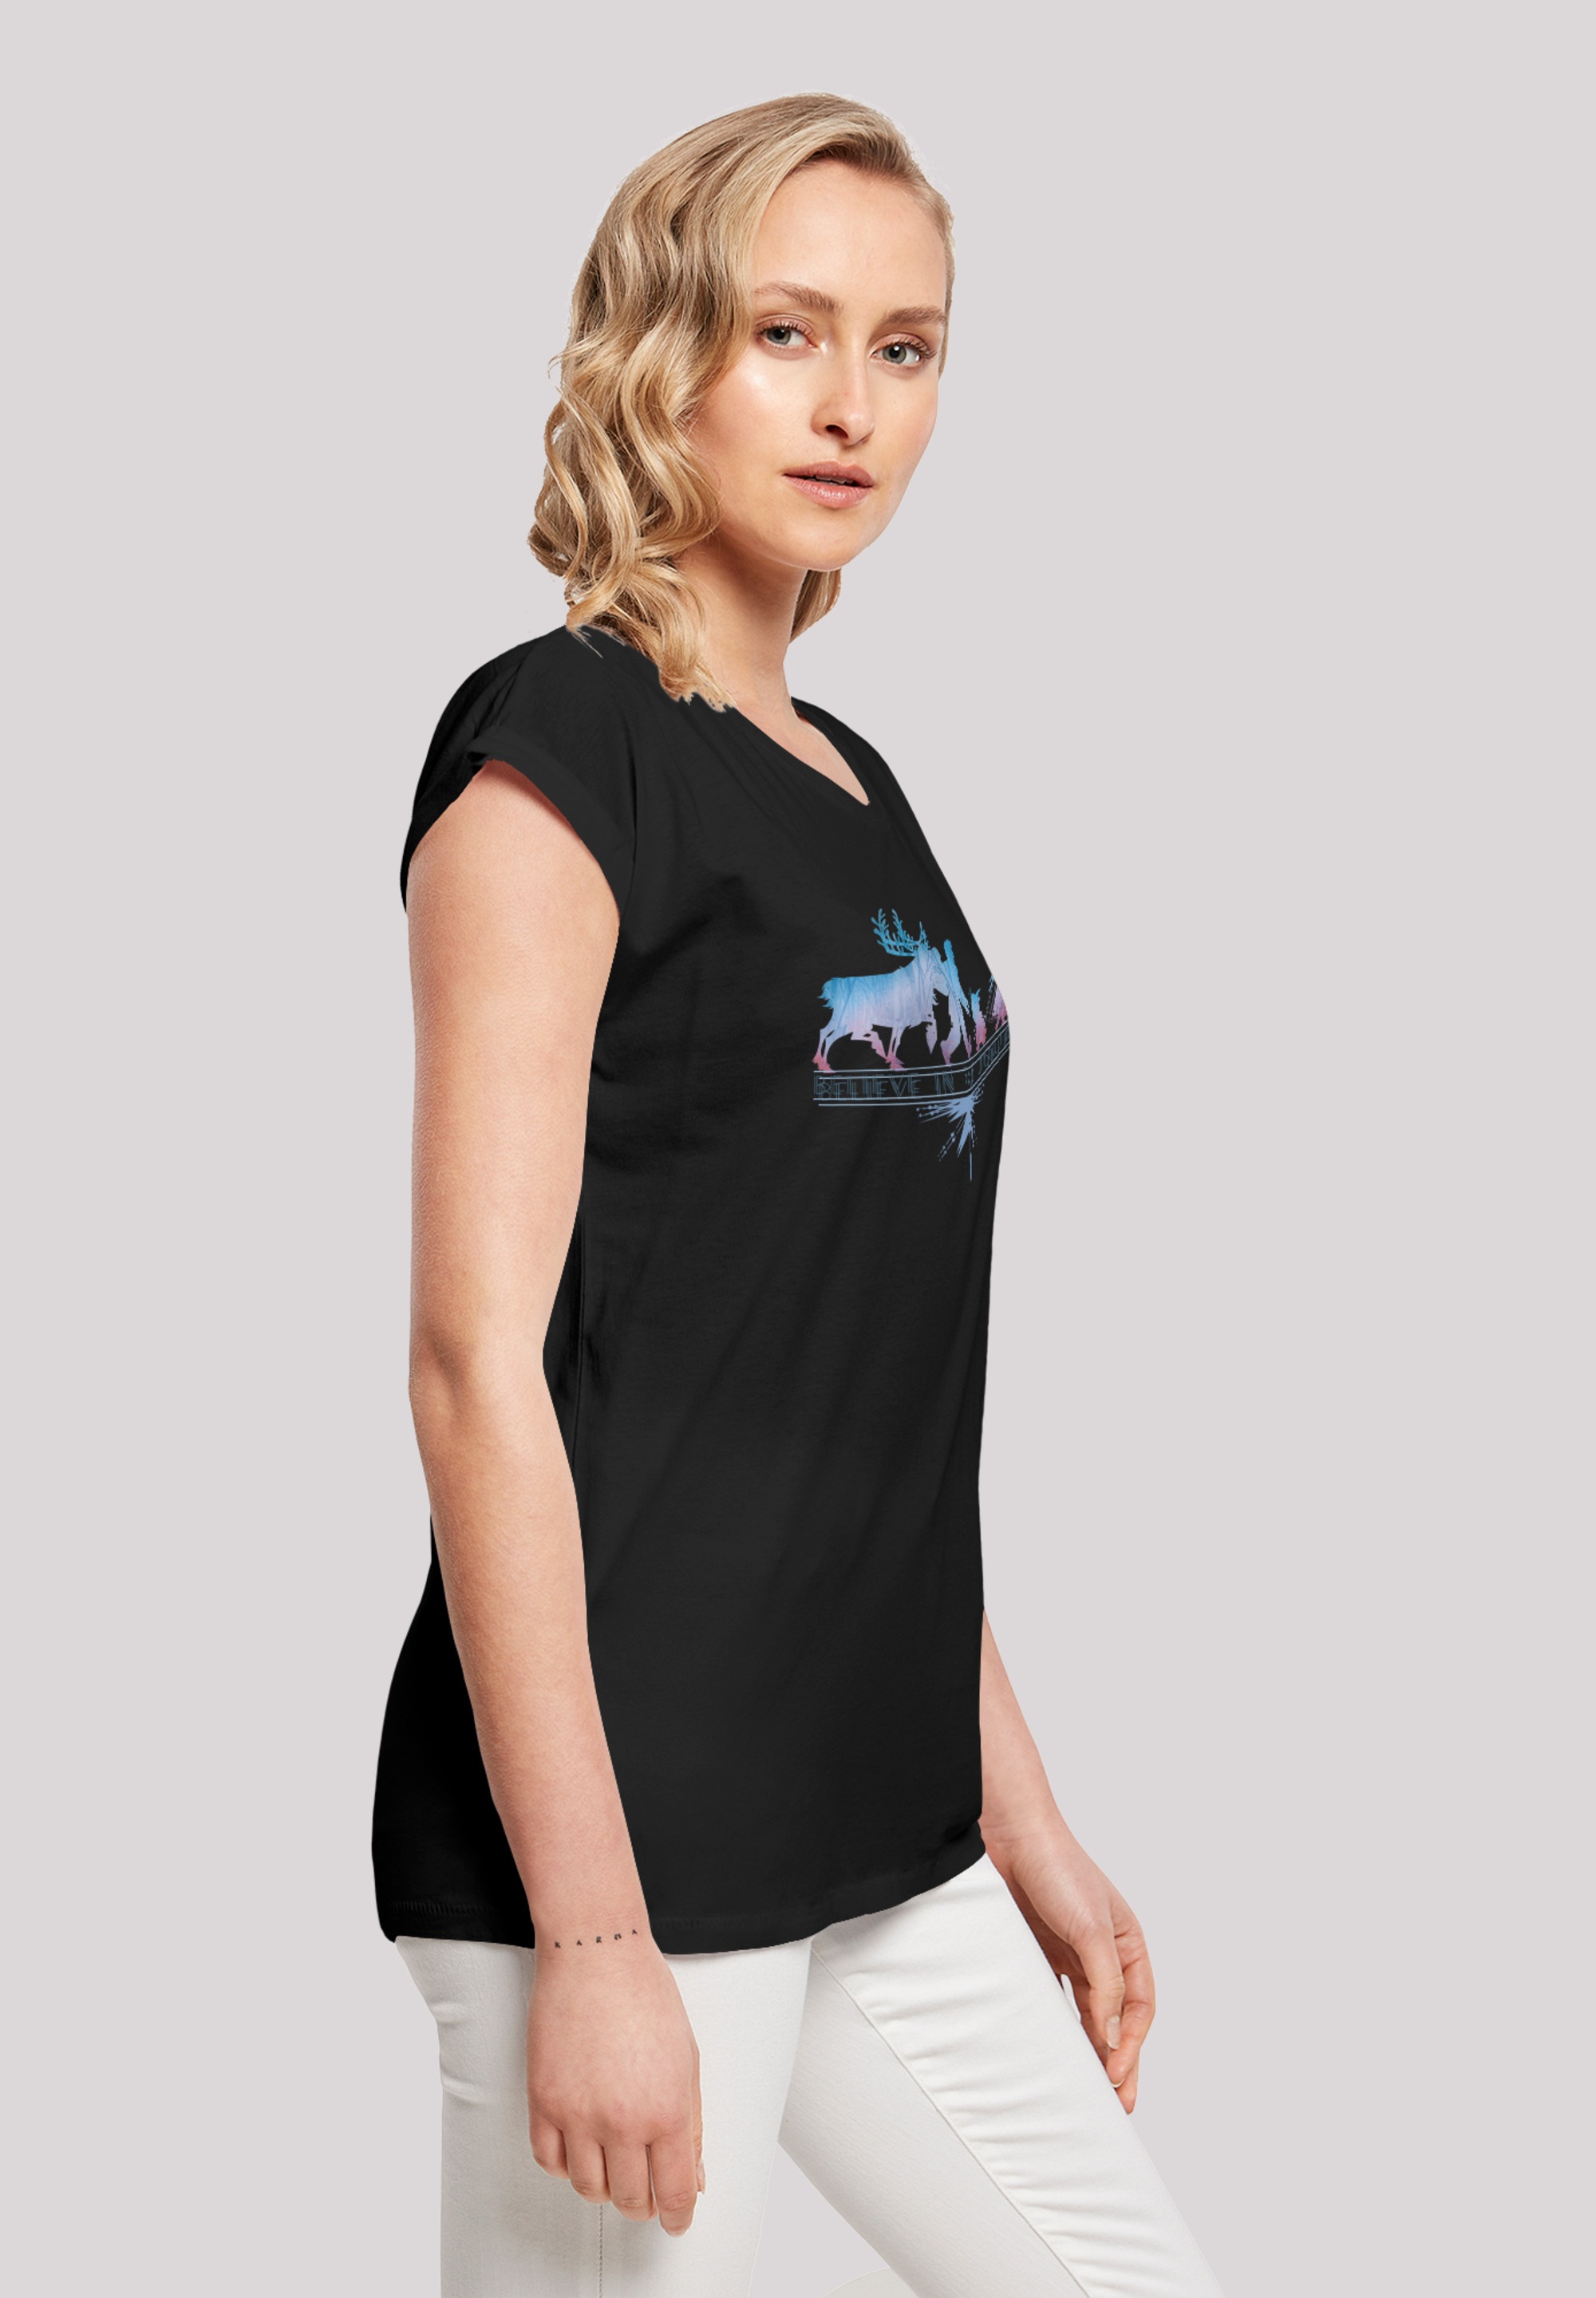 BAUR Believe Black The Journey\'«, Print | F4NT4STIC In 2 Friday T-Shirt »Frozen